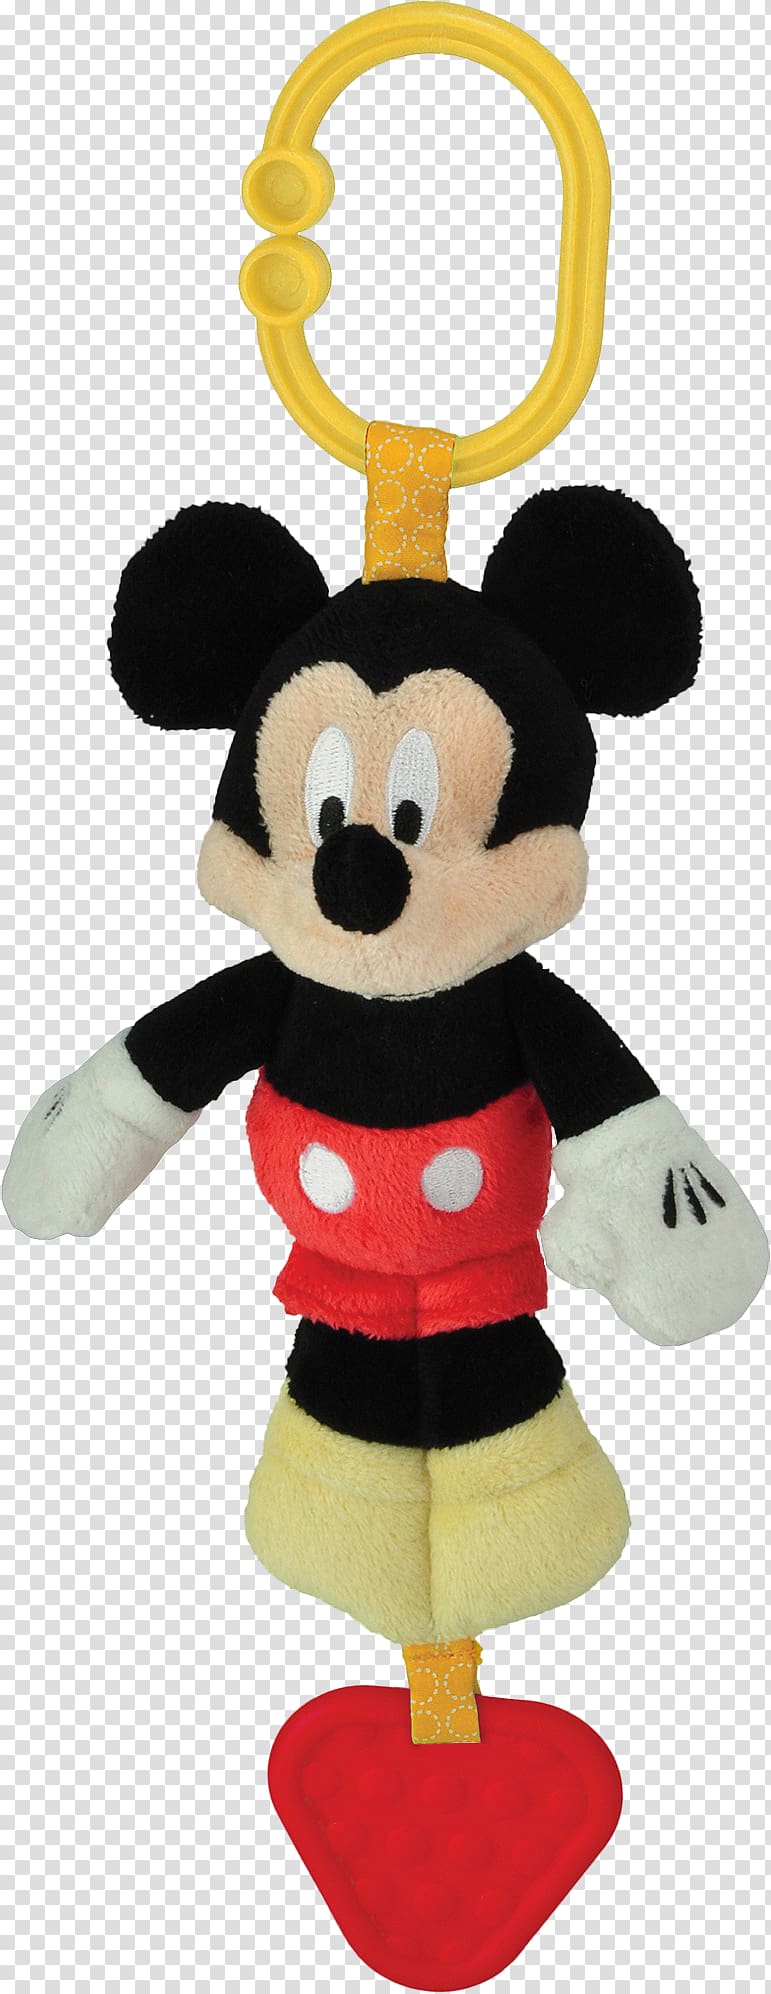 Mickey Mouse Minnie Mouse Stuffed Animals & Cuddly Toys Infant, mickey mouse transparent background PNG clipart